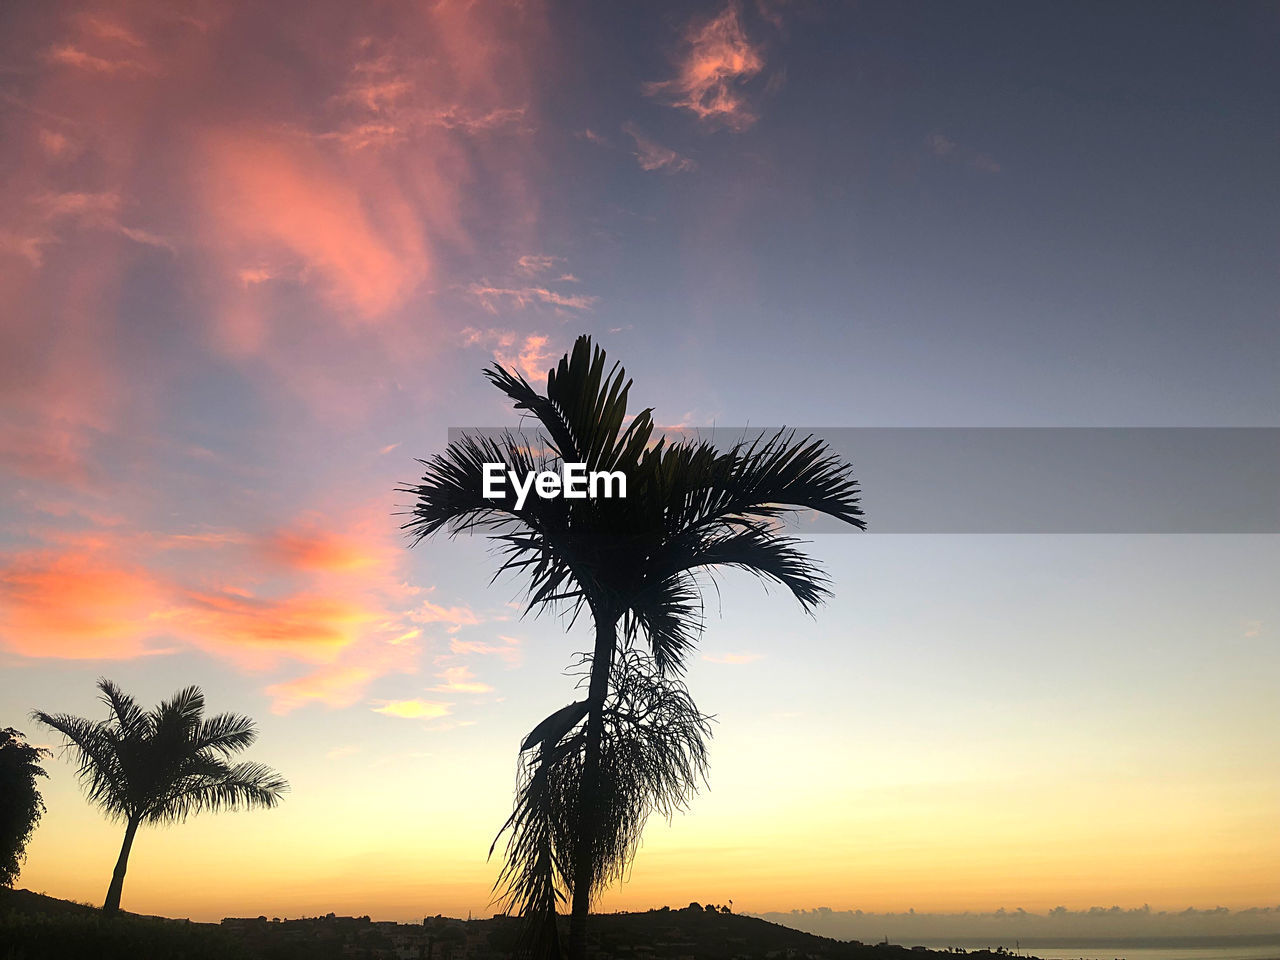 sky, palm tree, tropical climate, sunset, tree, horizon, beauty in nature, silhouette, nature, plant, dusk, scenics - nature, cloud, tranquility, land, tranquil scene, evening, sunlight, environment, no people, coconut palm tree, travel destinations, landscape, water, outdoors, sea, beach, dramatic sky, idyllic, tropical tree, orange color, sun, borassus flabellifer, holiday, travel, vacation, afterglow, trip, palm leaf, romantic sky, back lit, savanna